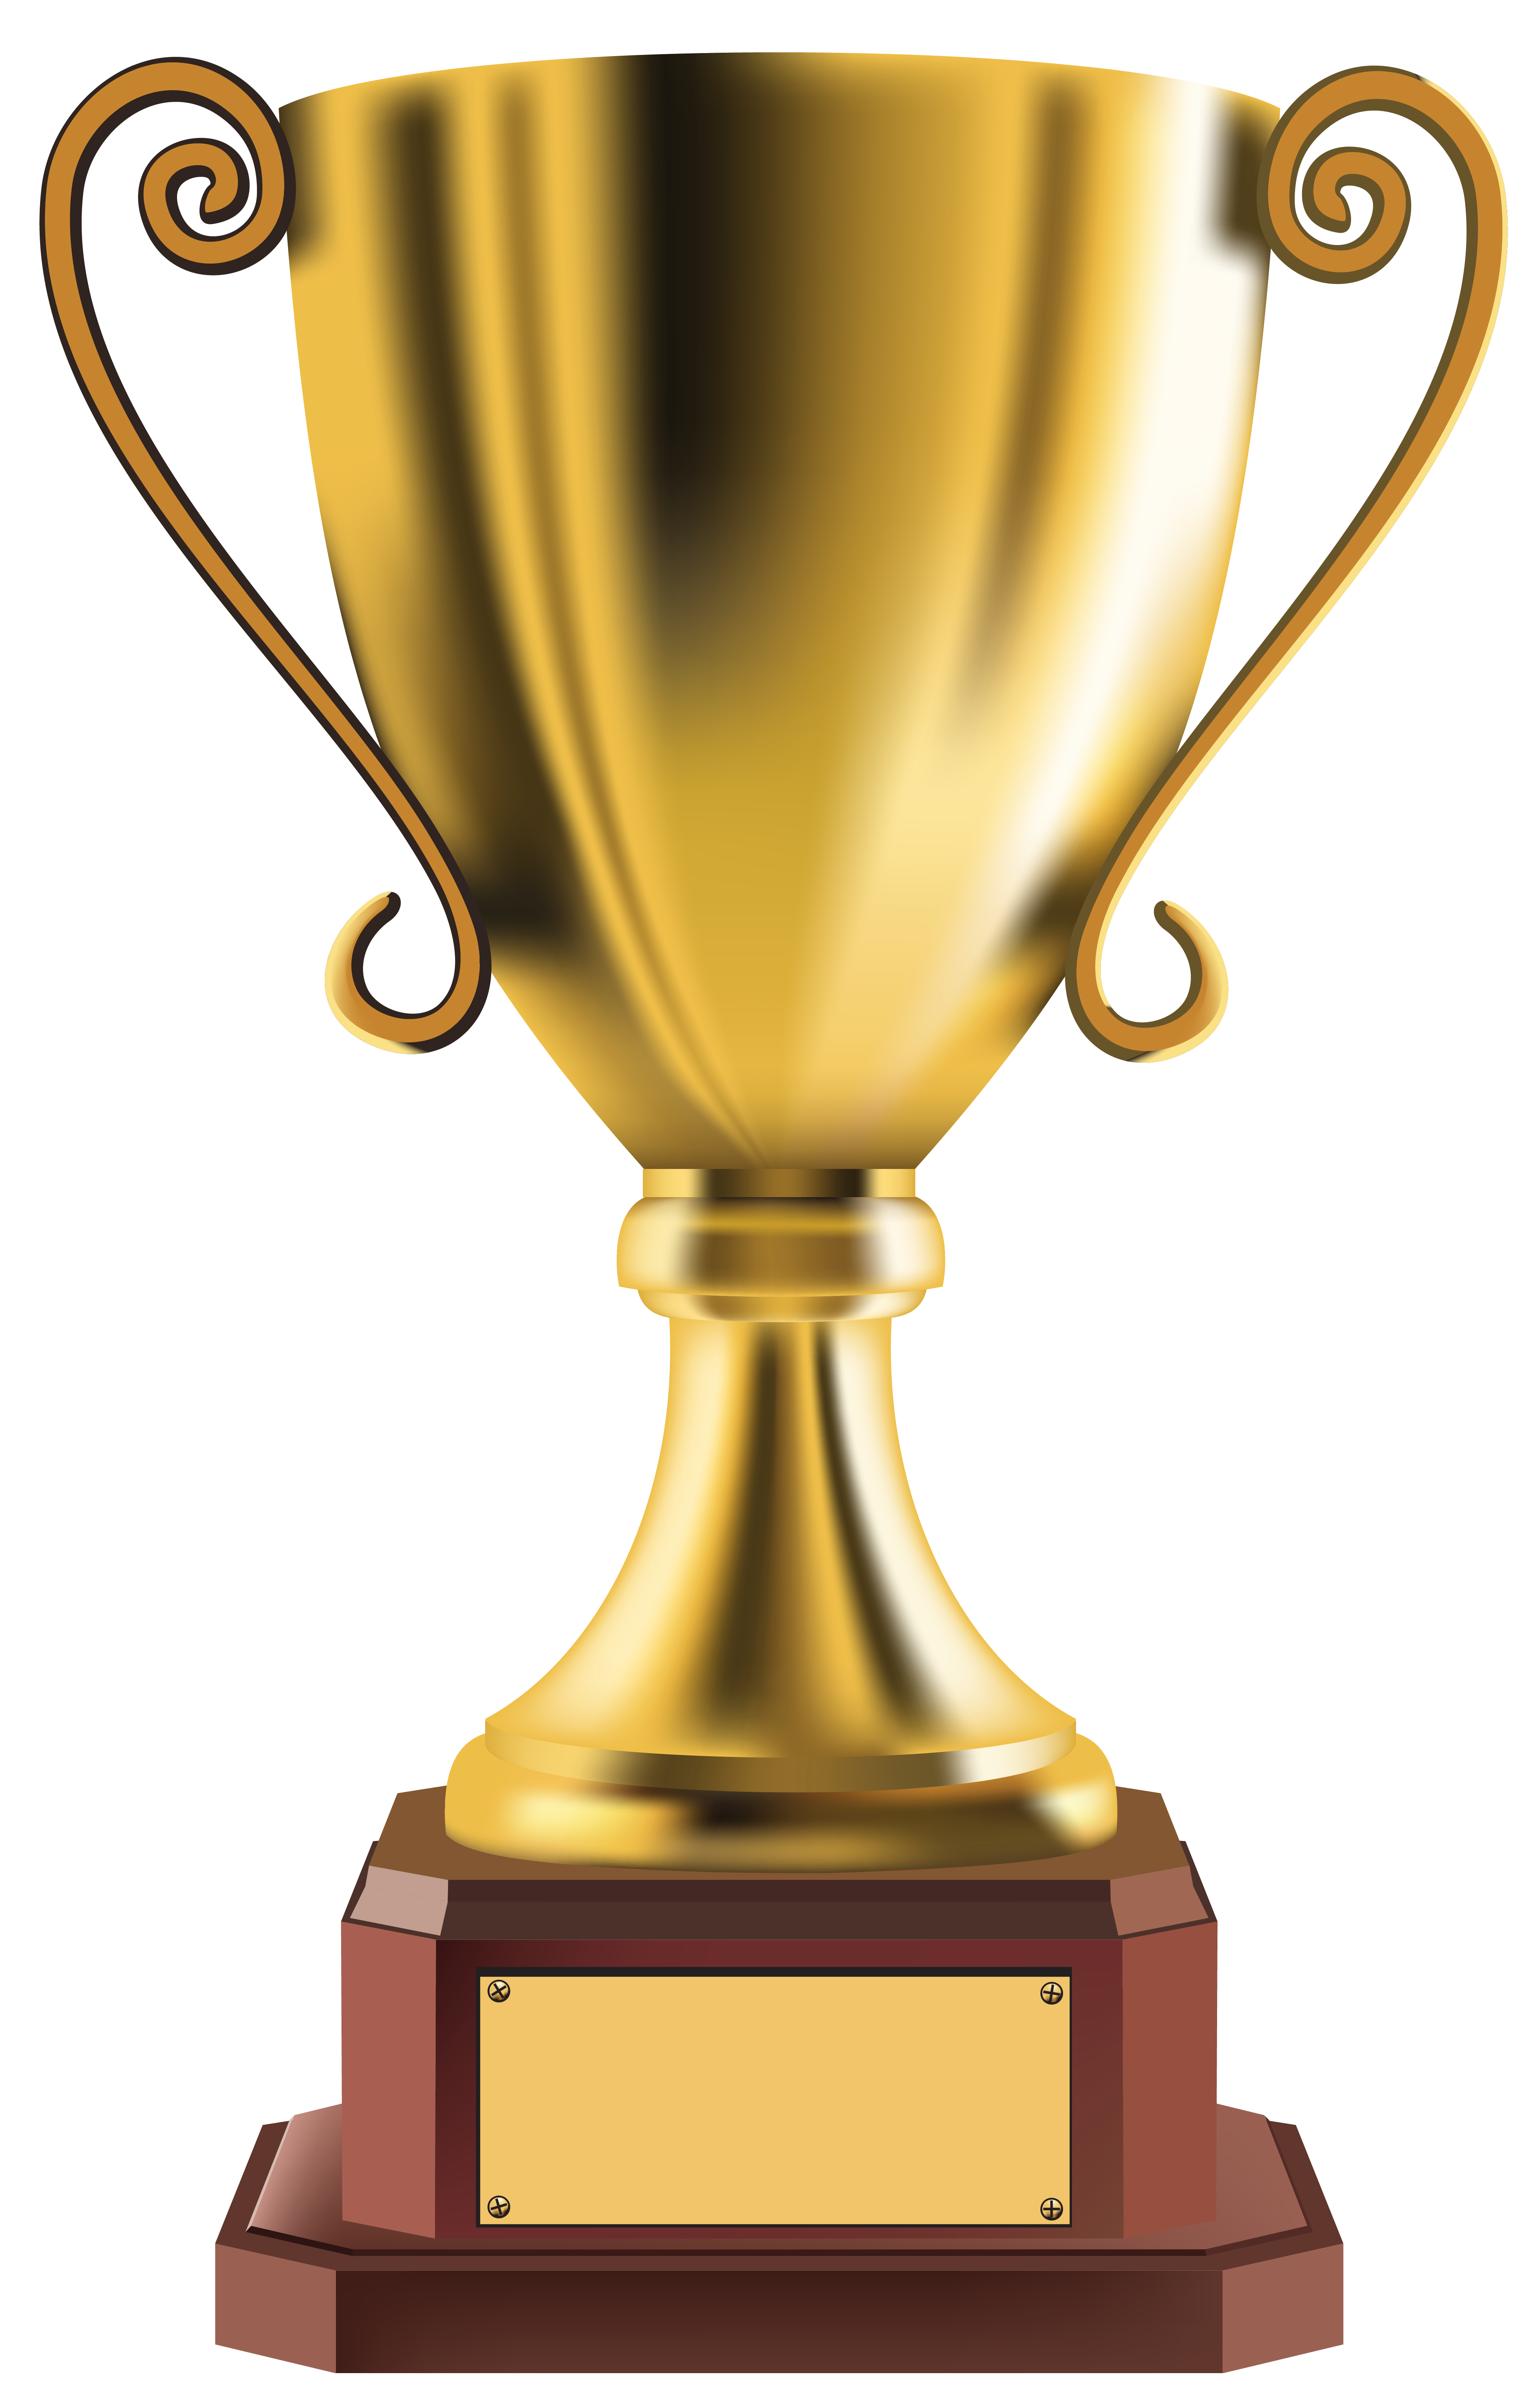 Transparent Gold Cup Trophy PNG Picture Quality Image And Transparent PNG Free Clipart